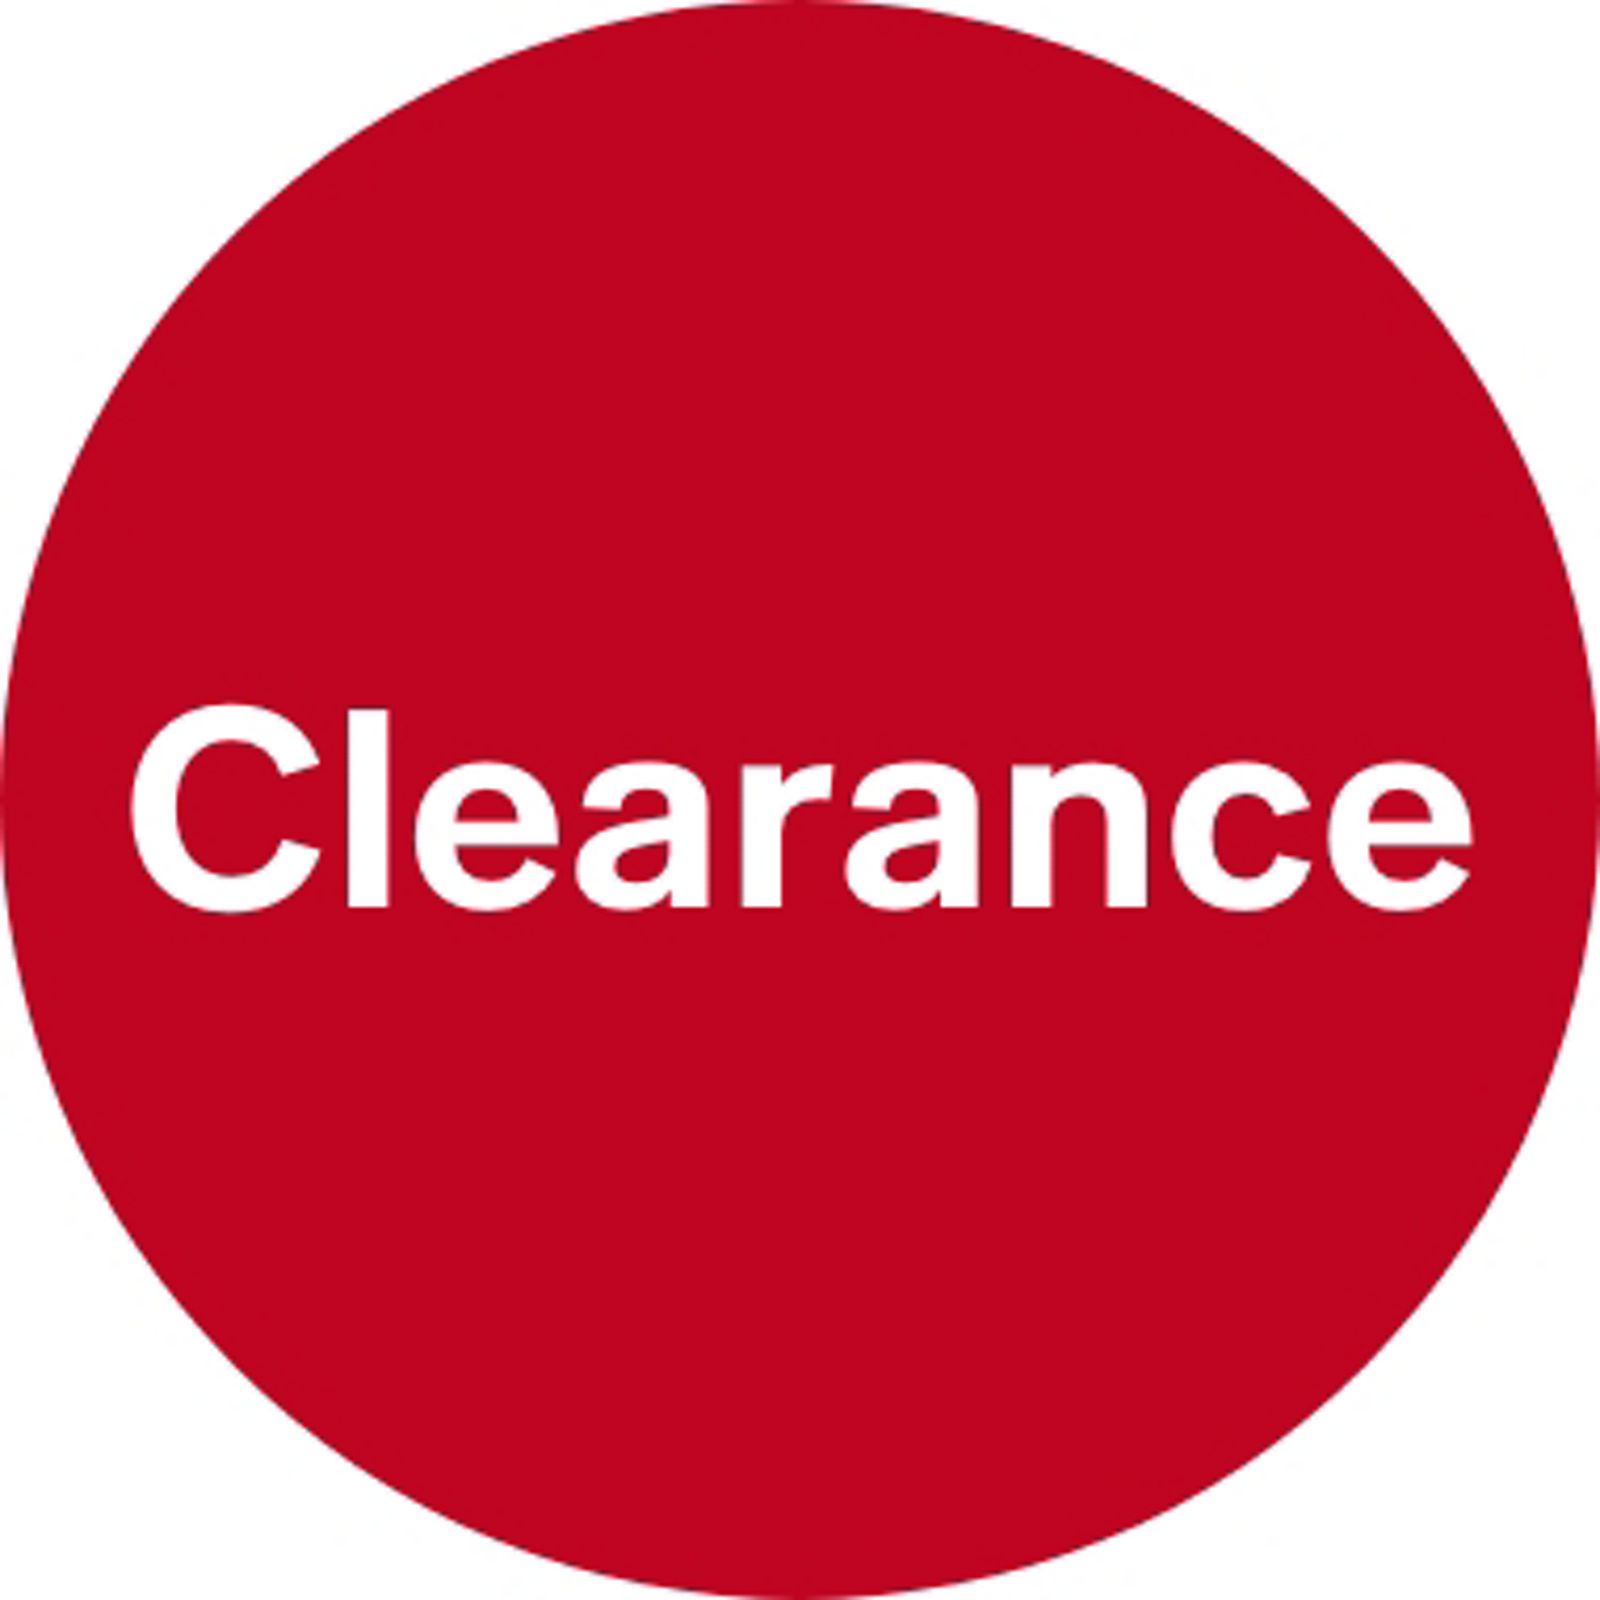 Home Furnishings & Products on Clearance - Macy's